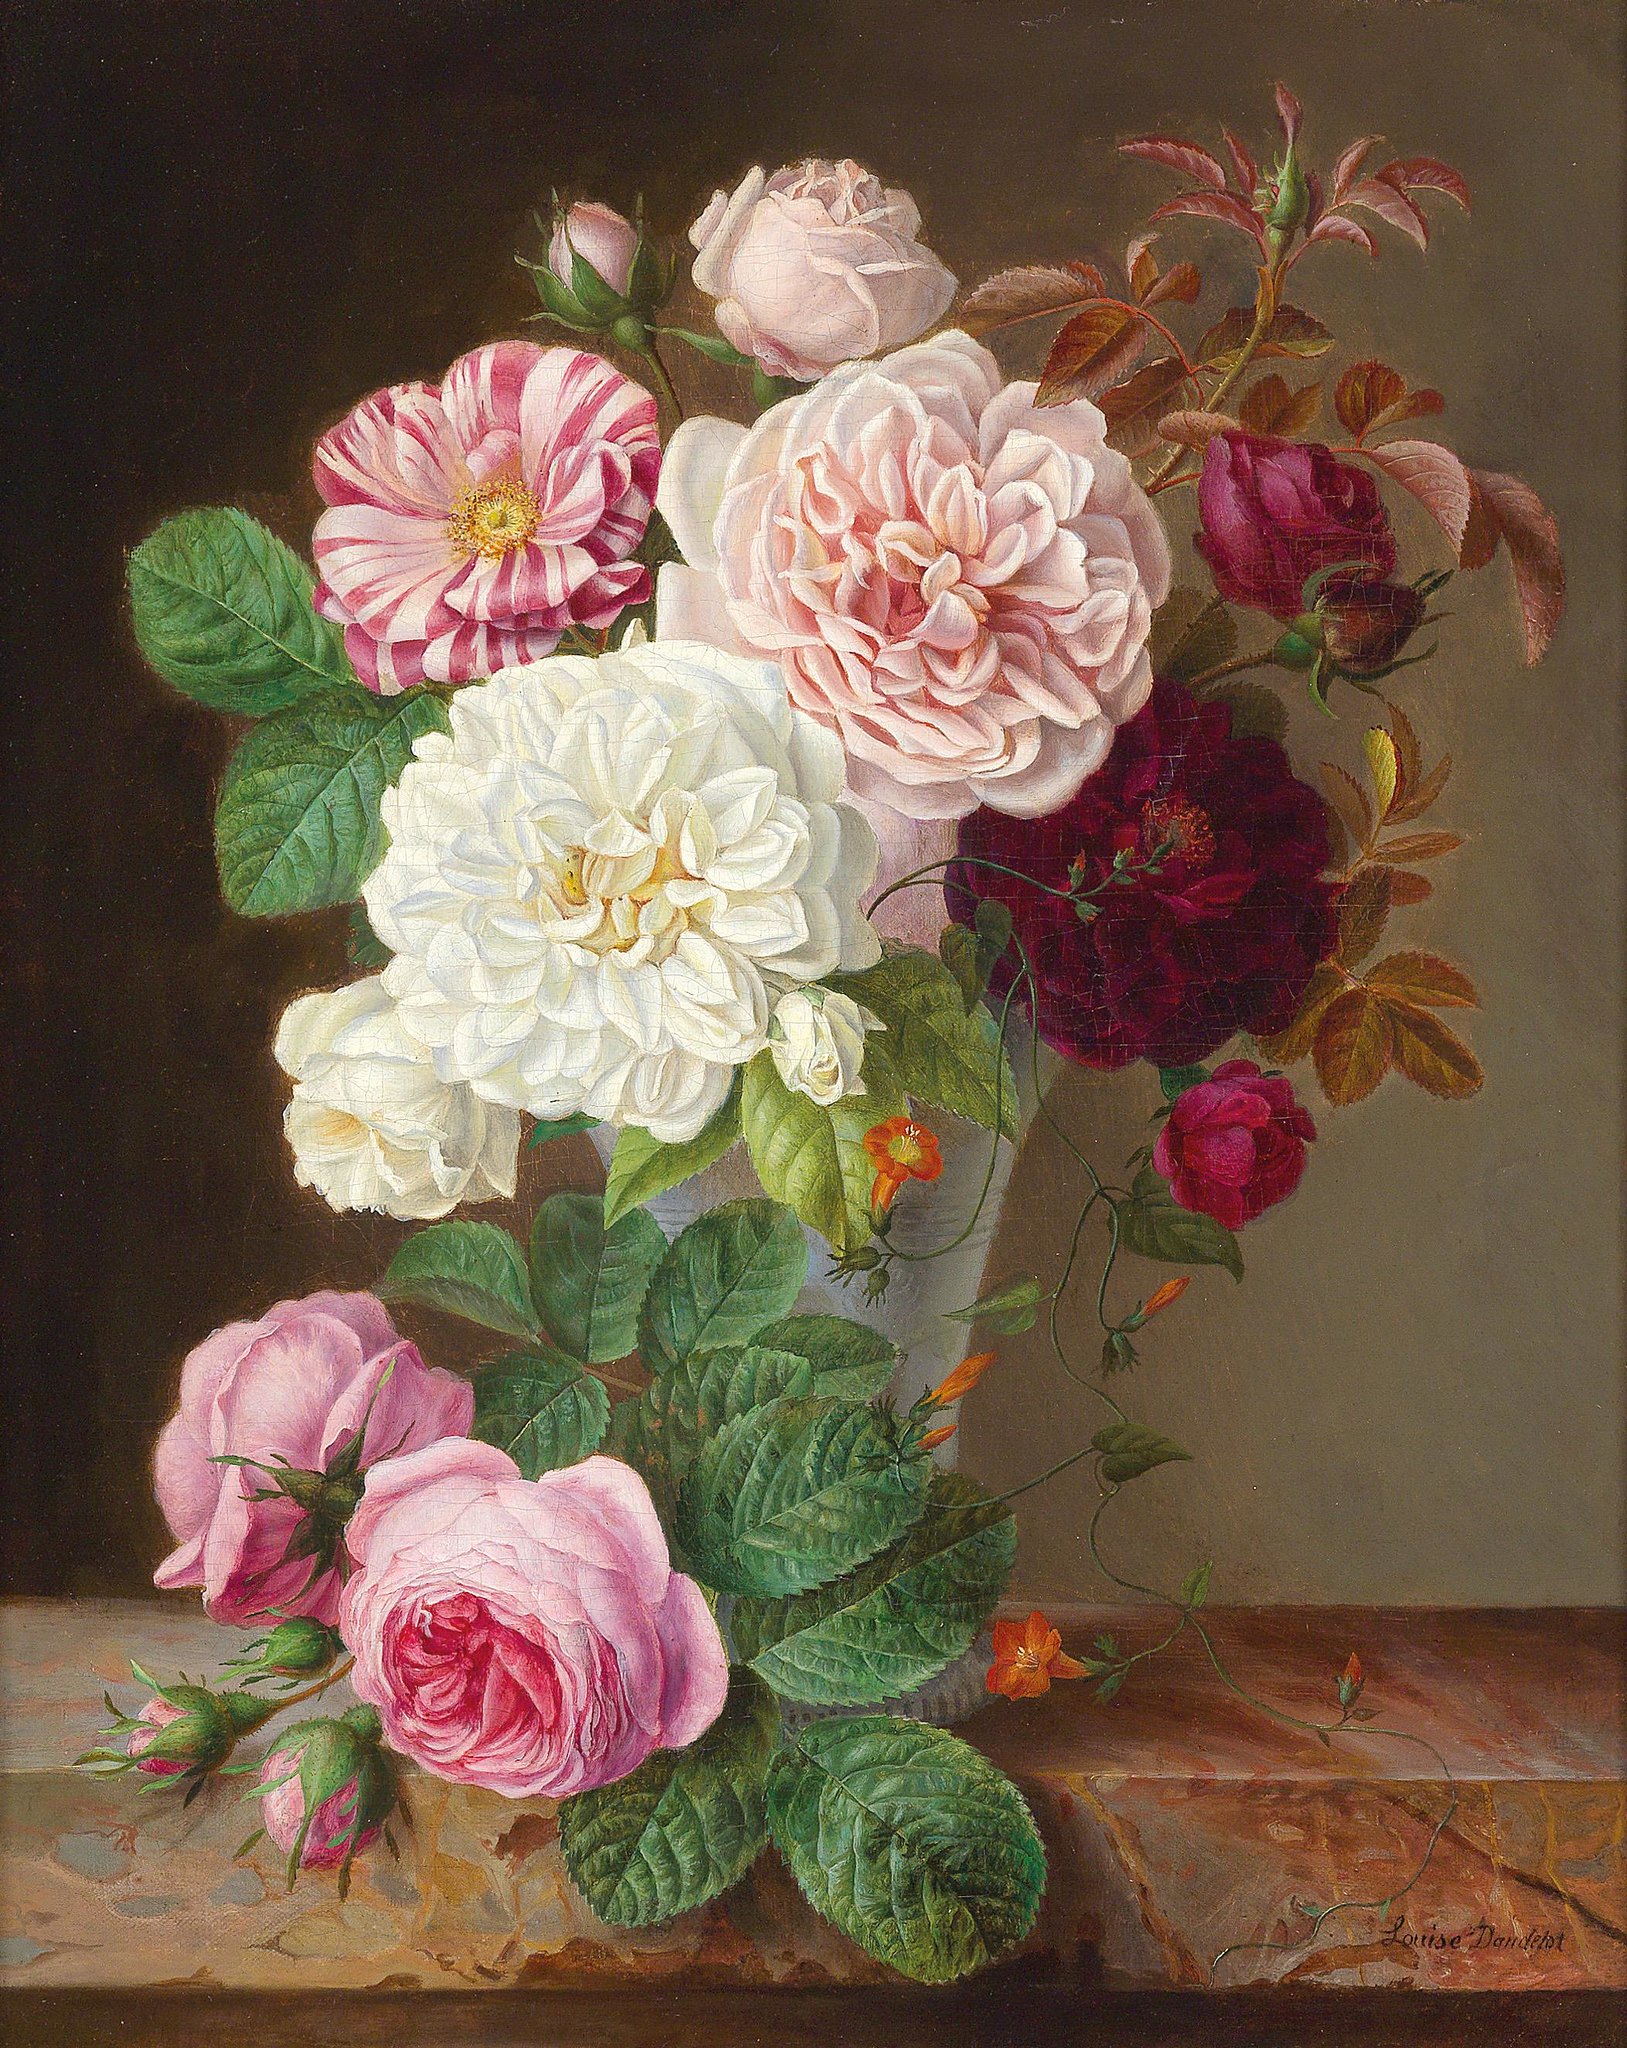 Still Life with Roses by Louise Dandelot, 1866